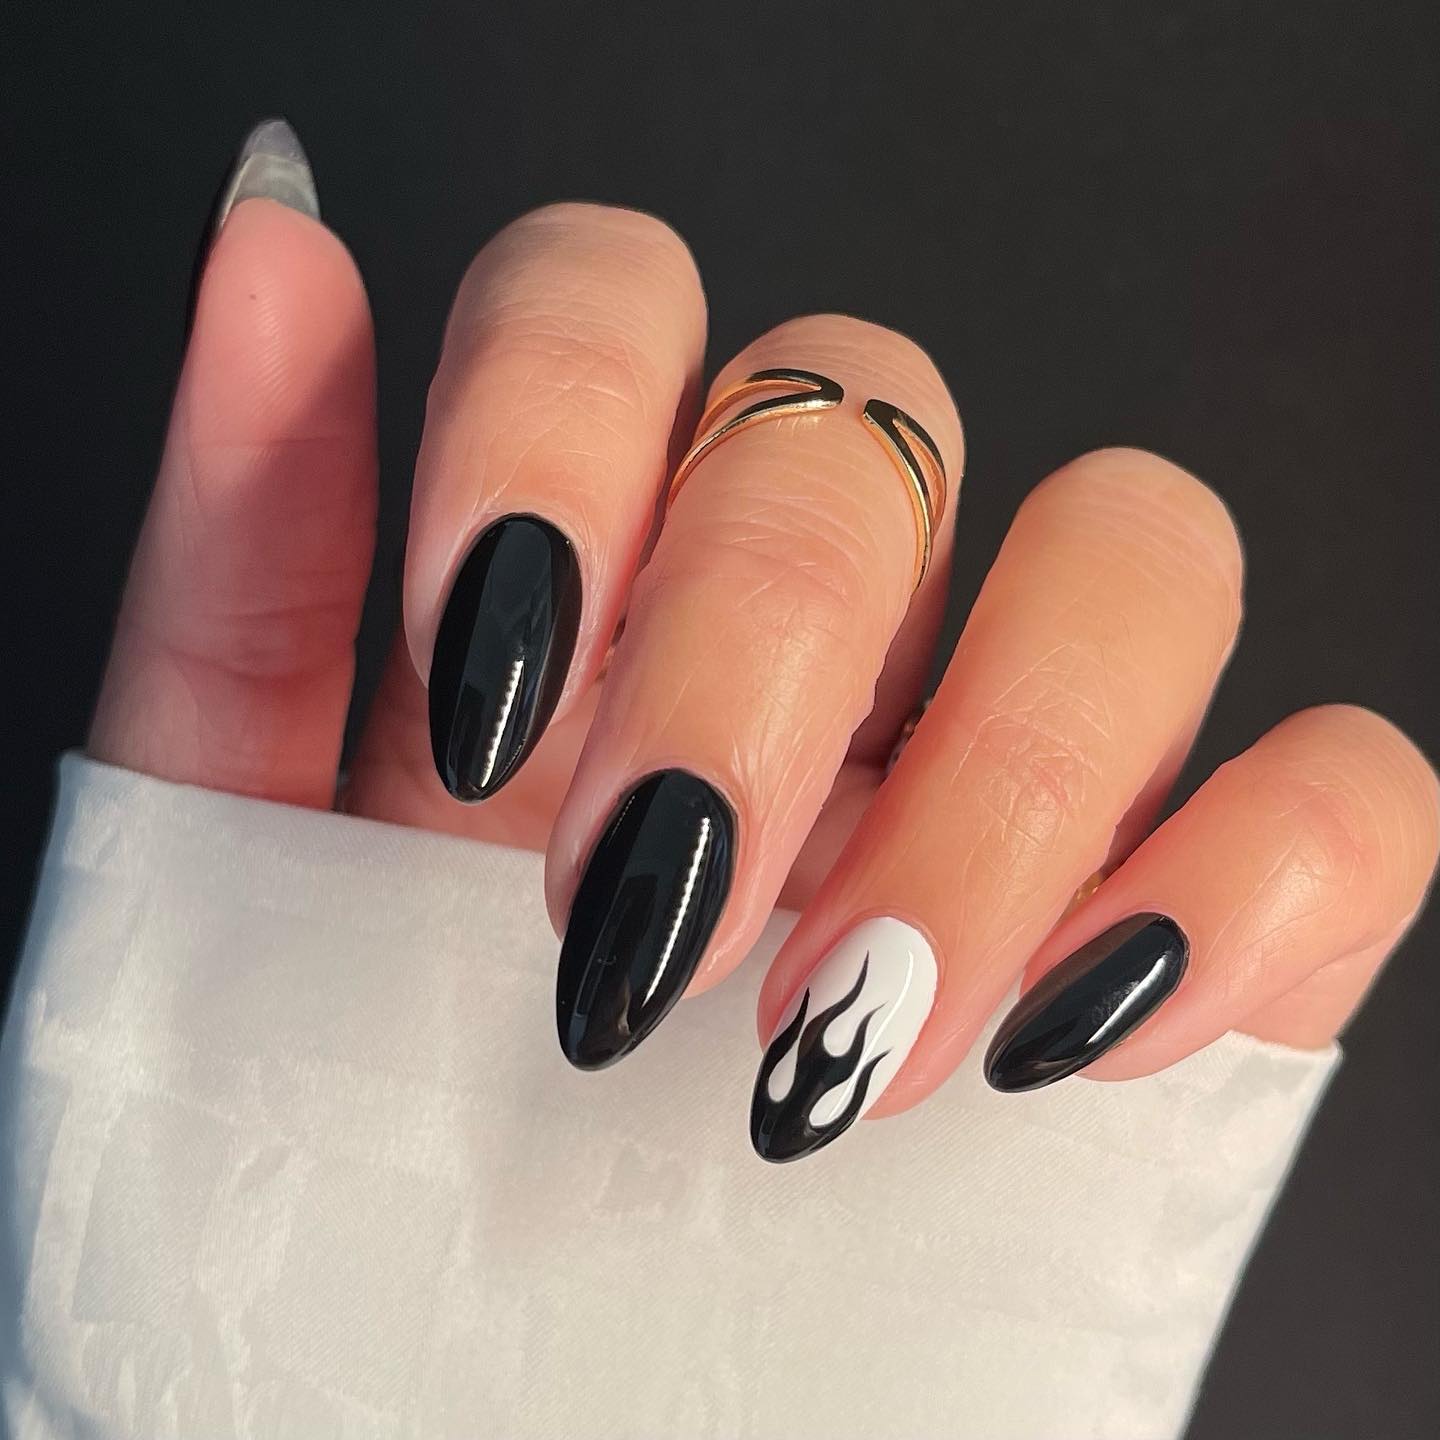 Short Round Black Nails with Flame Design on Ring Finger